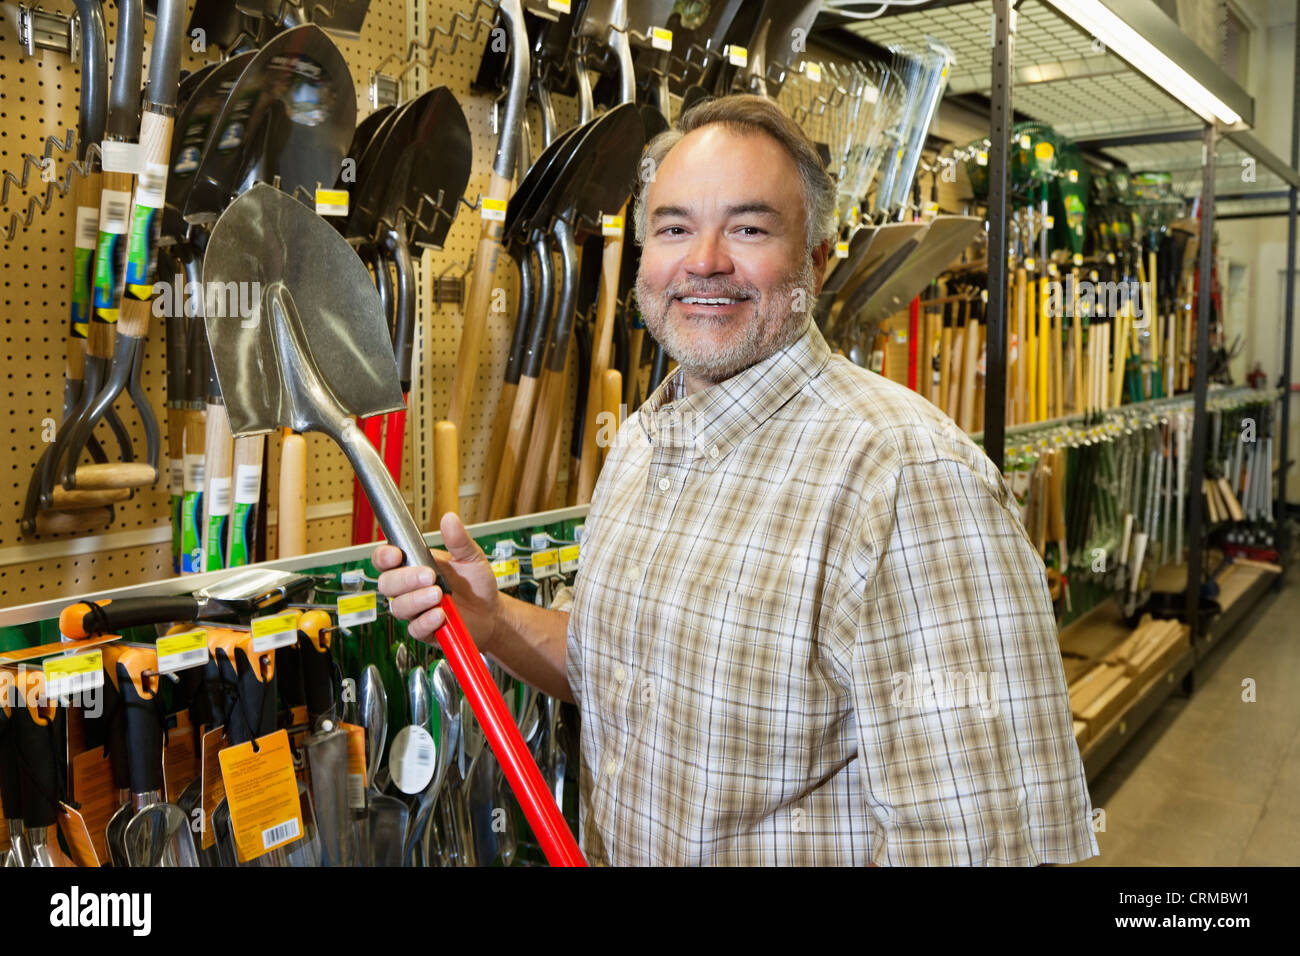 Portrait of a happy mature man holding shovel in hardware store Stock Photo